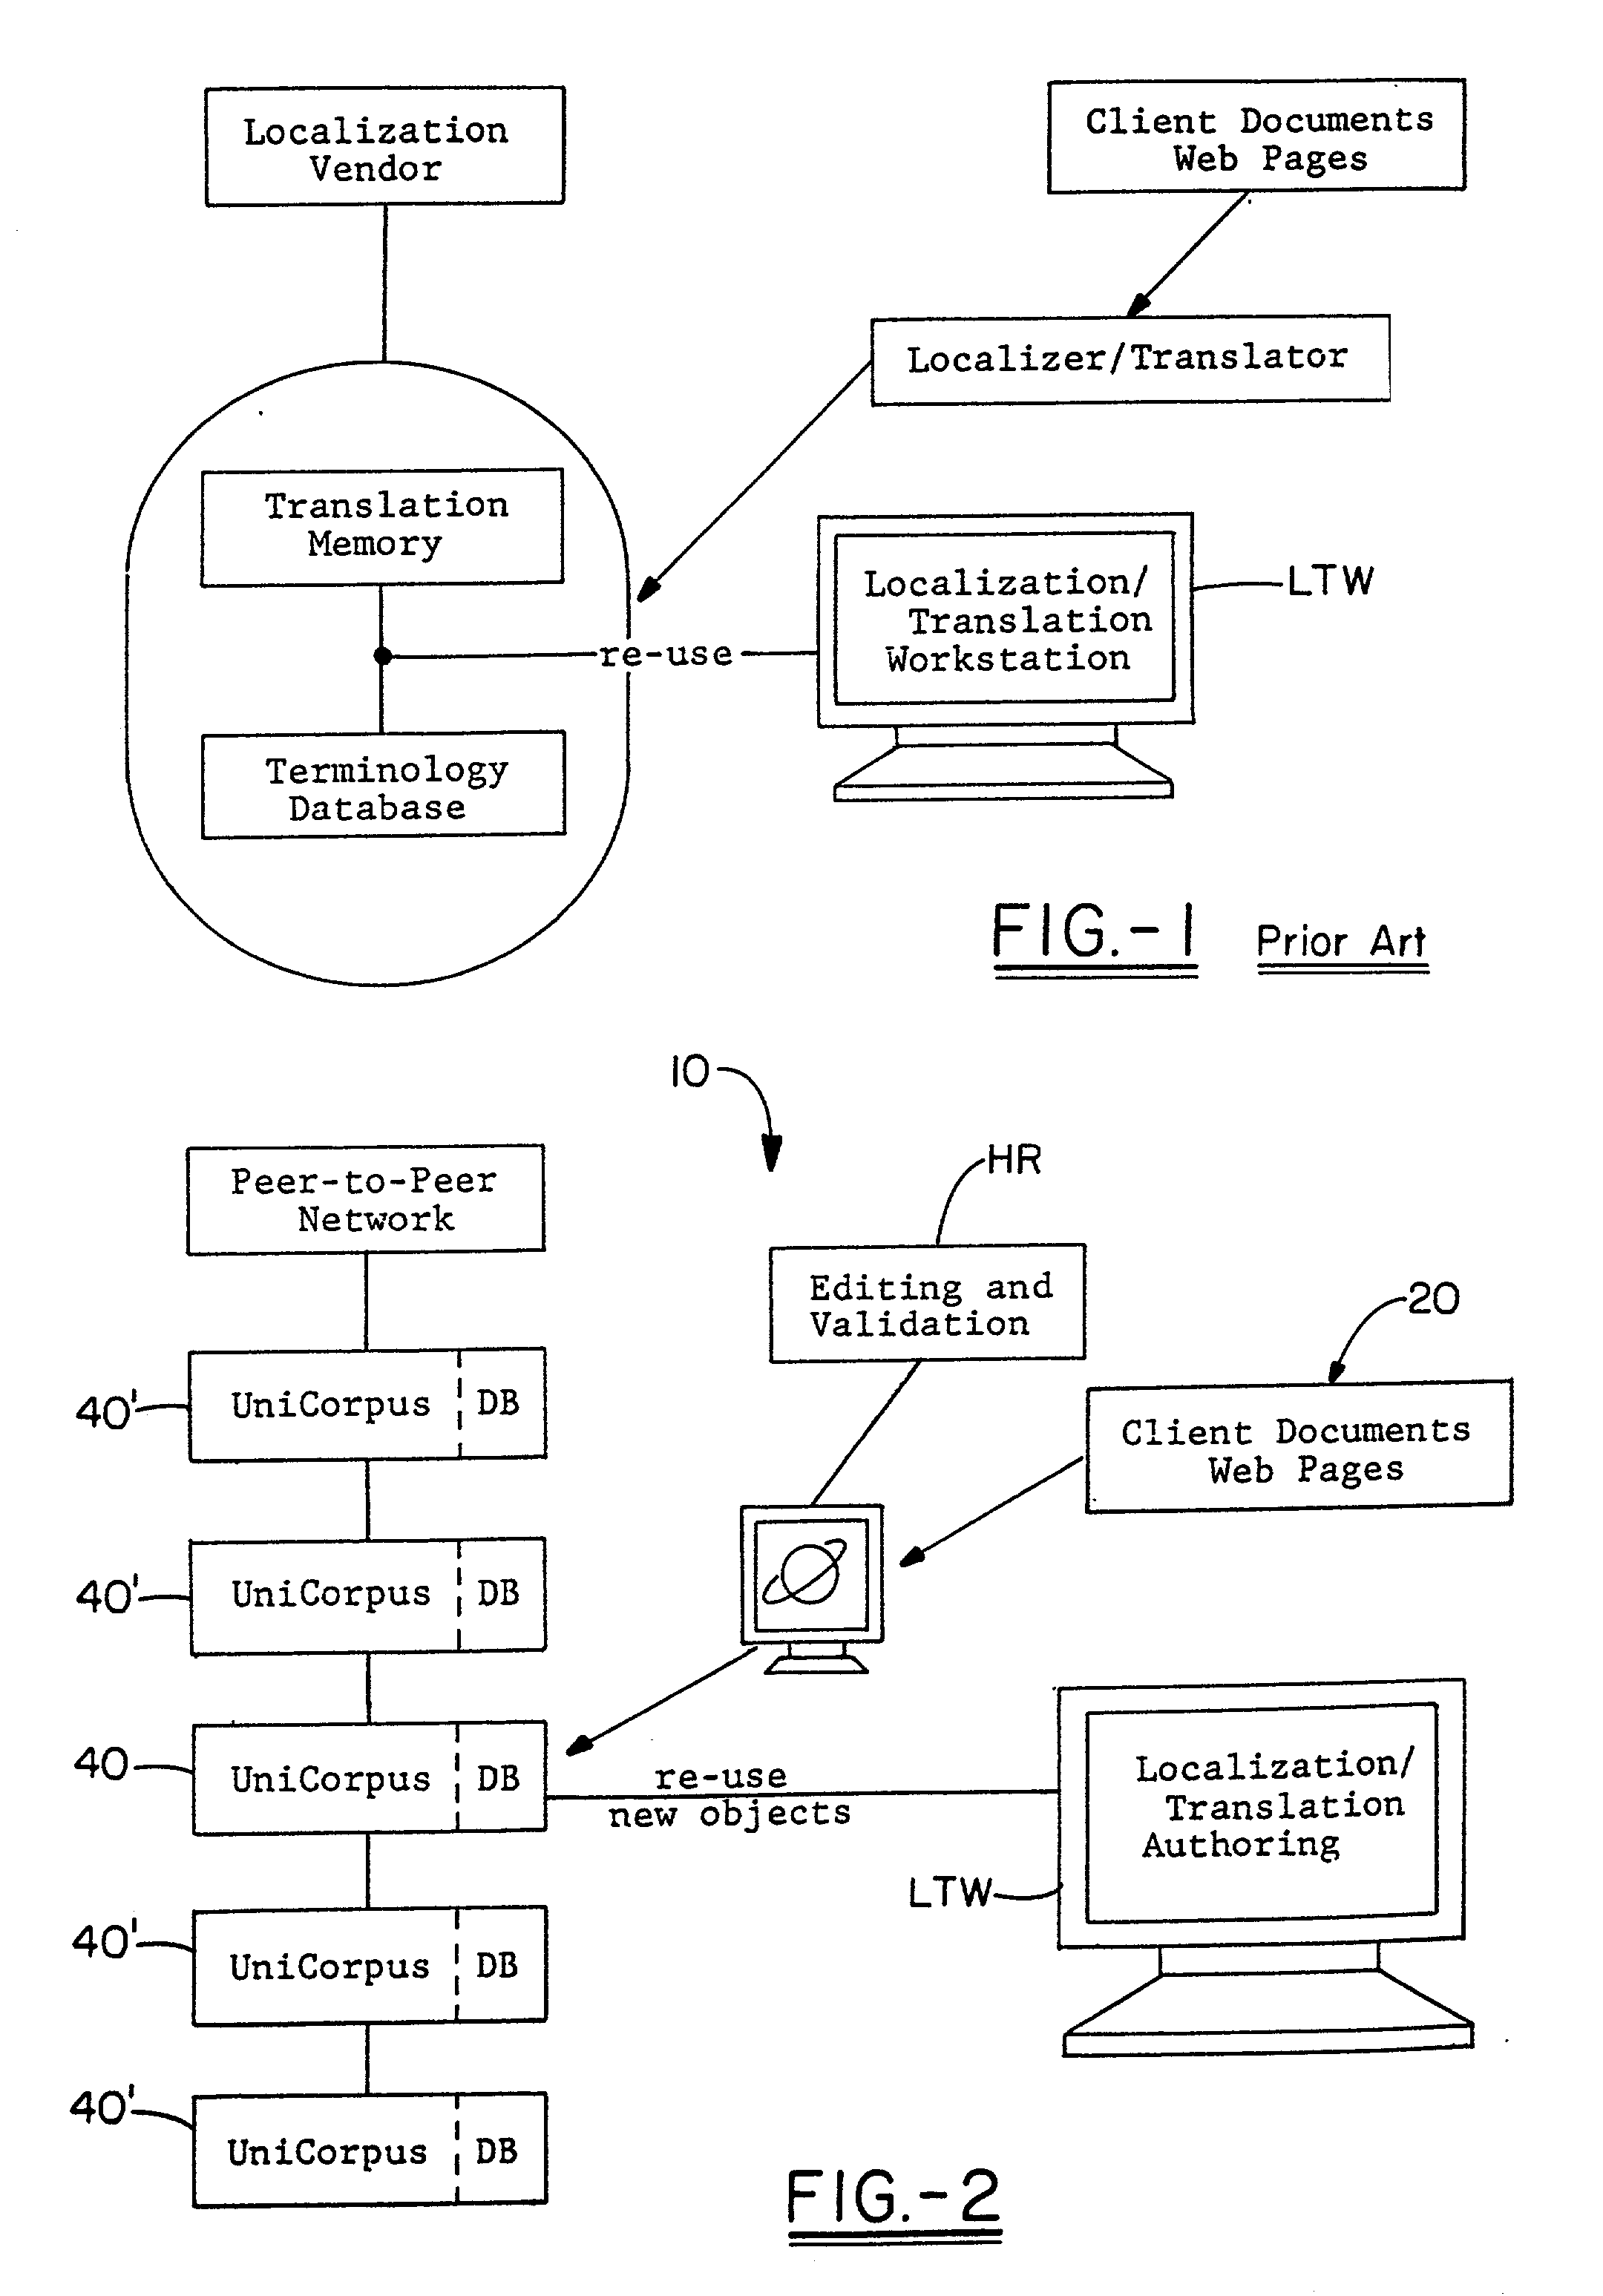 Process for the document management and computer-assisted translation of documents utilizing document corpora constructed by intelligent agents